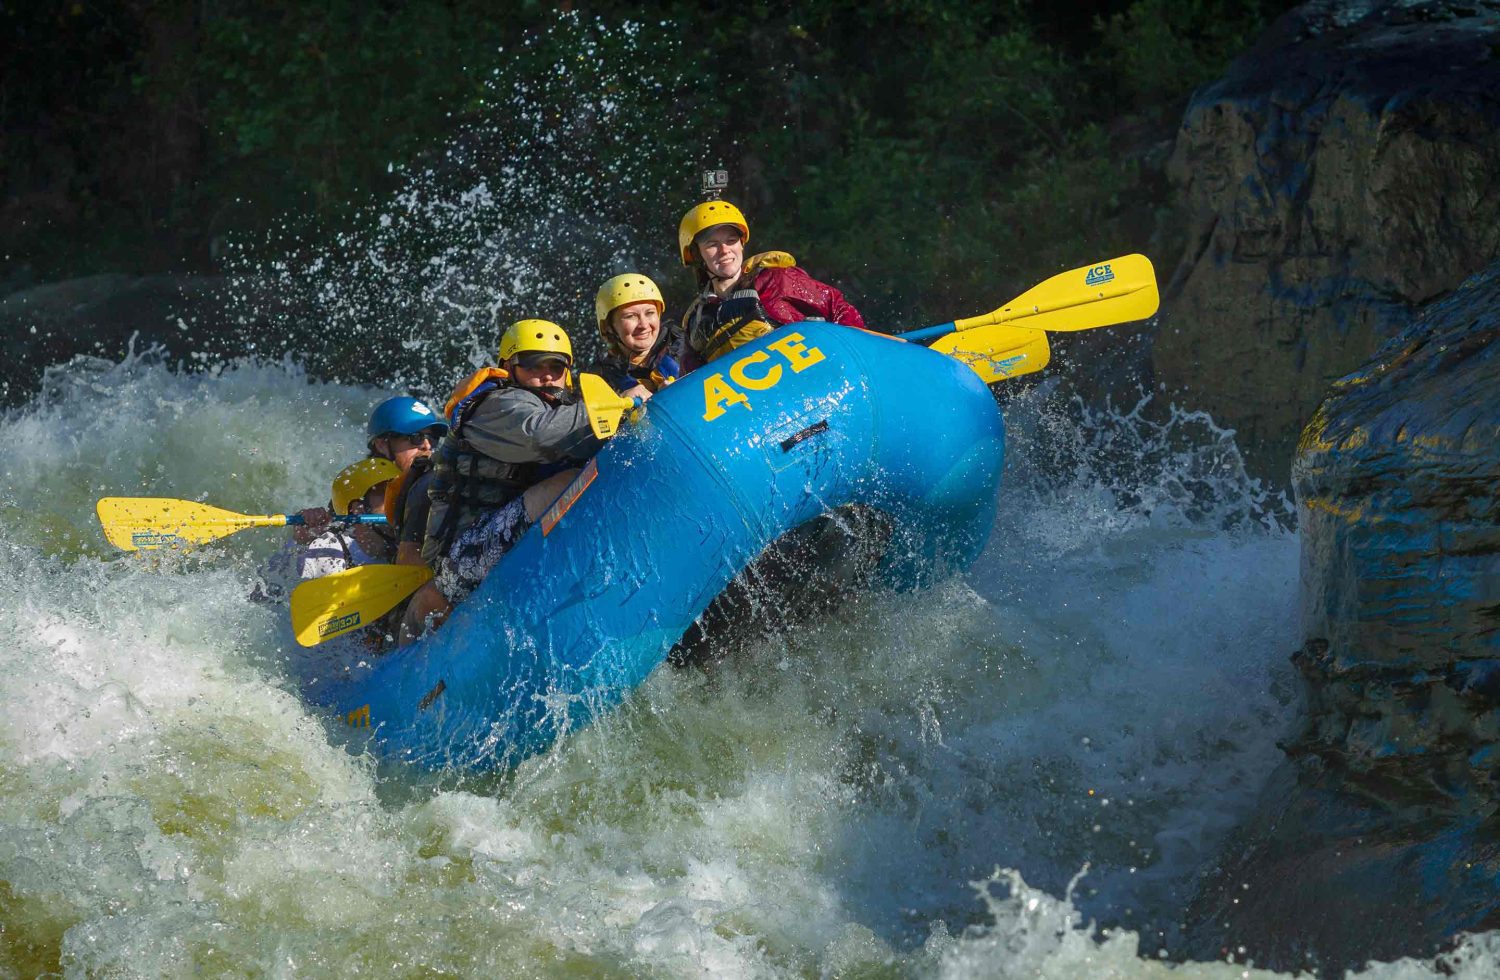 Save 15% On Fall Upper Gauley River Full Day Rafting Trips!*